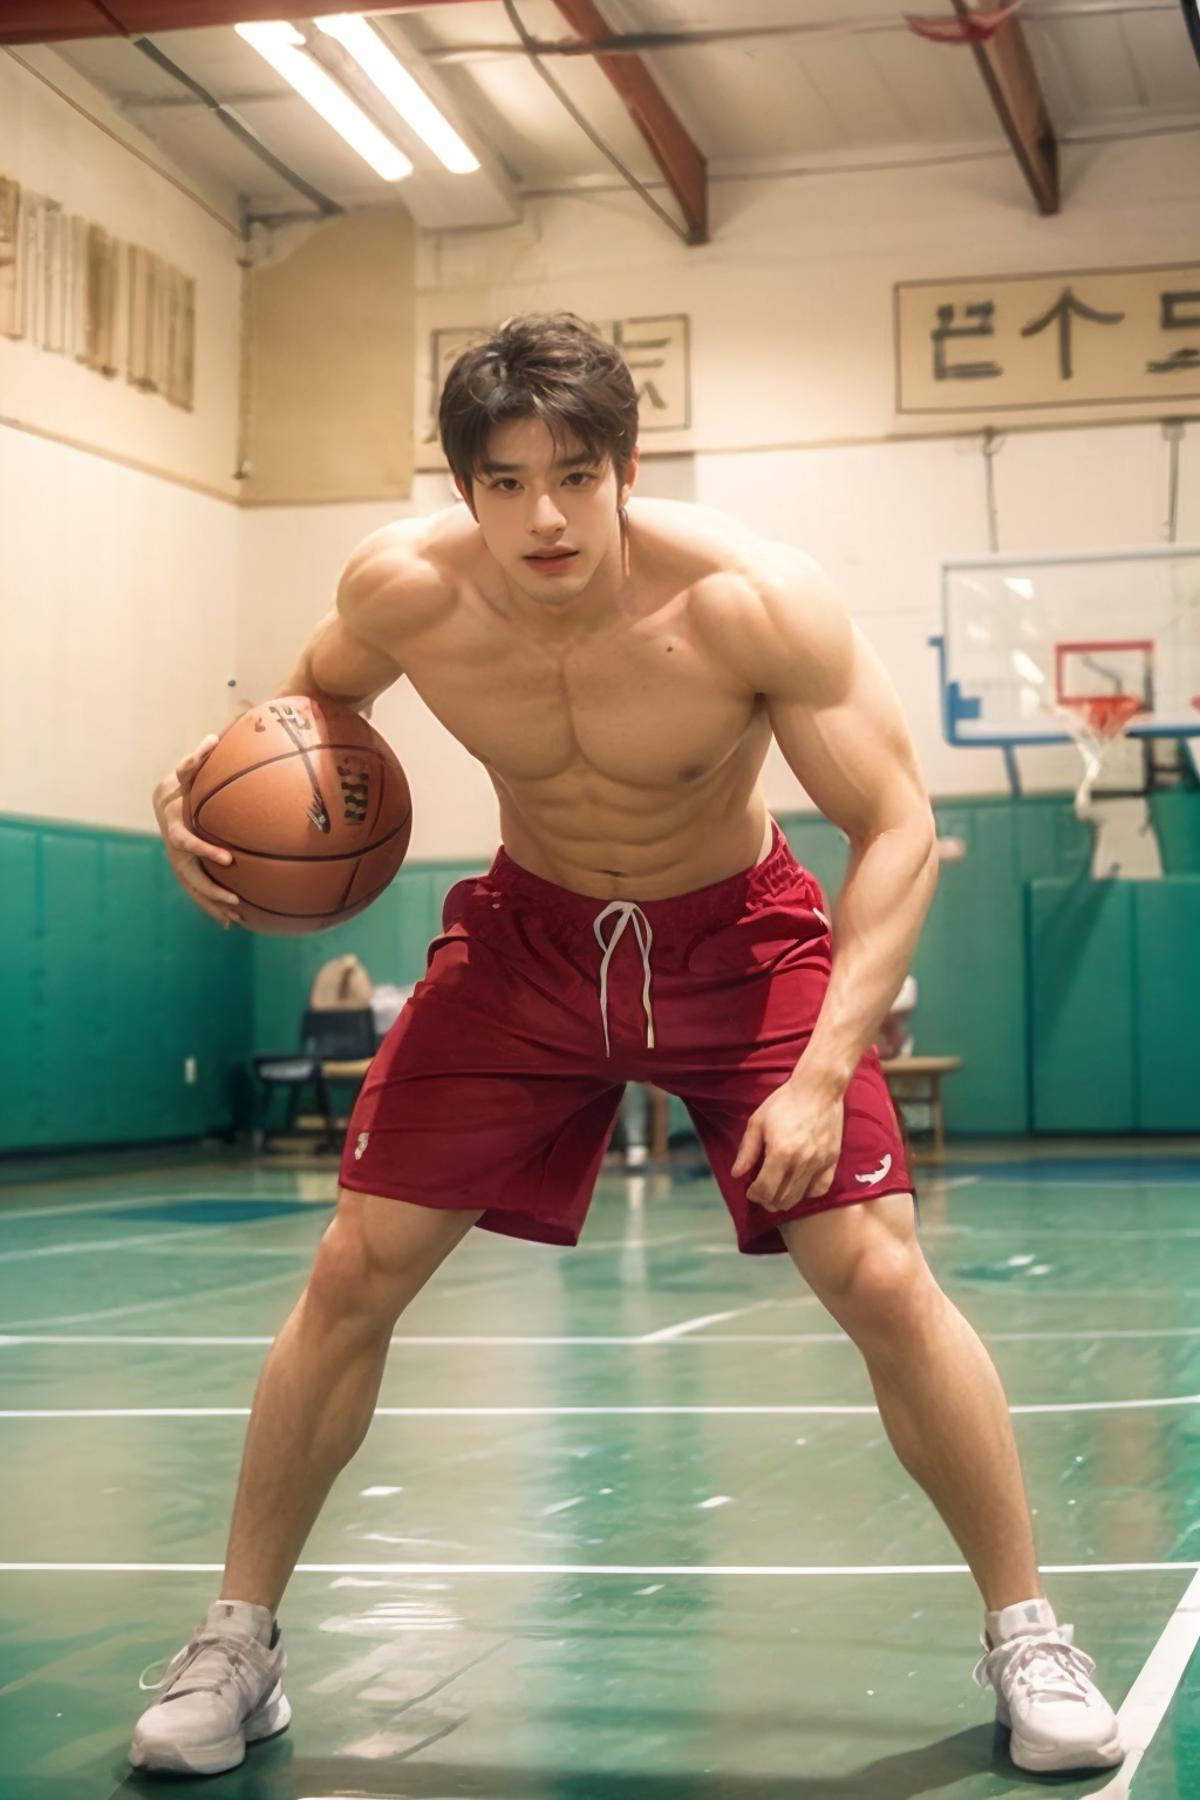 Sexy Basketball Player image by tonyhs